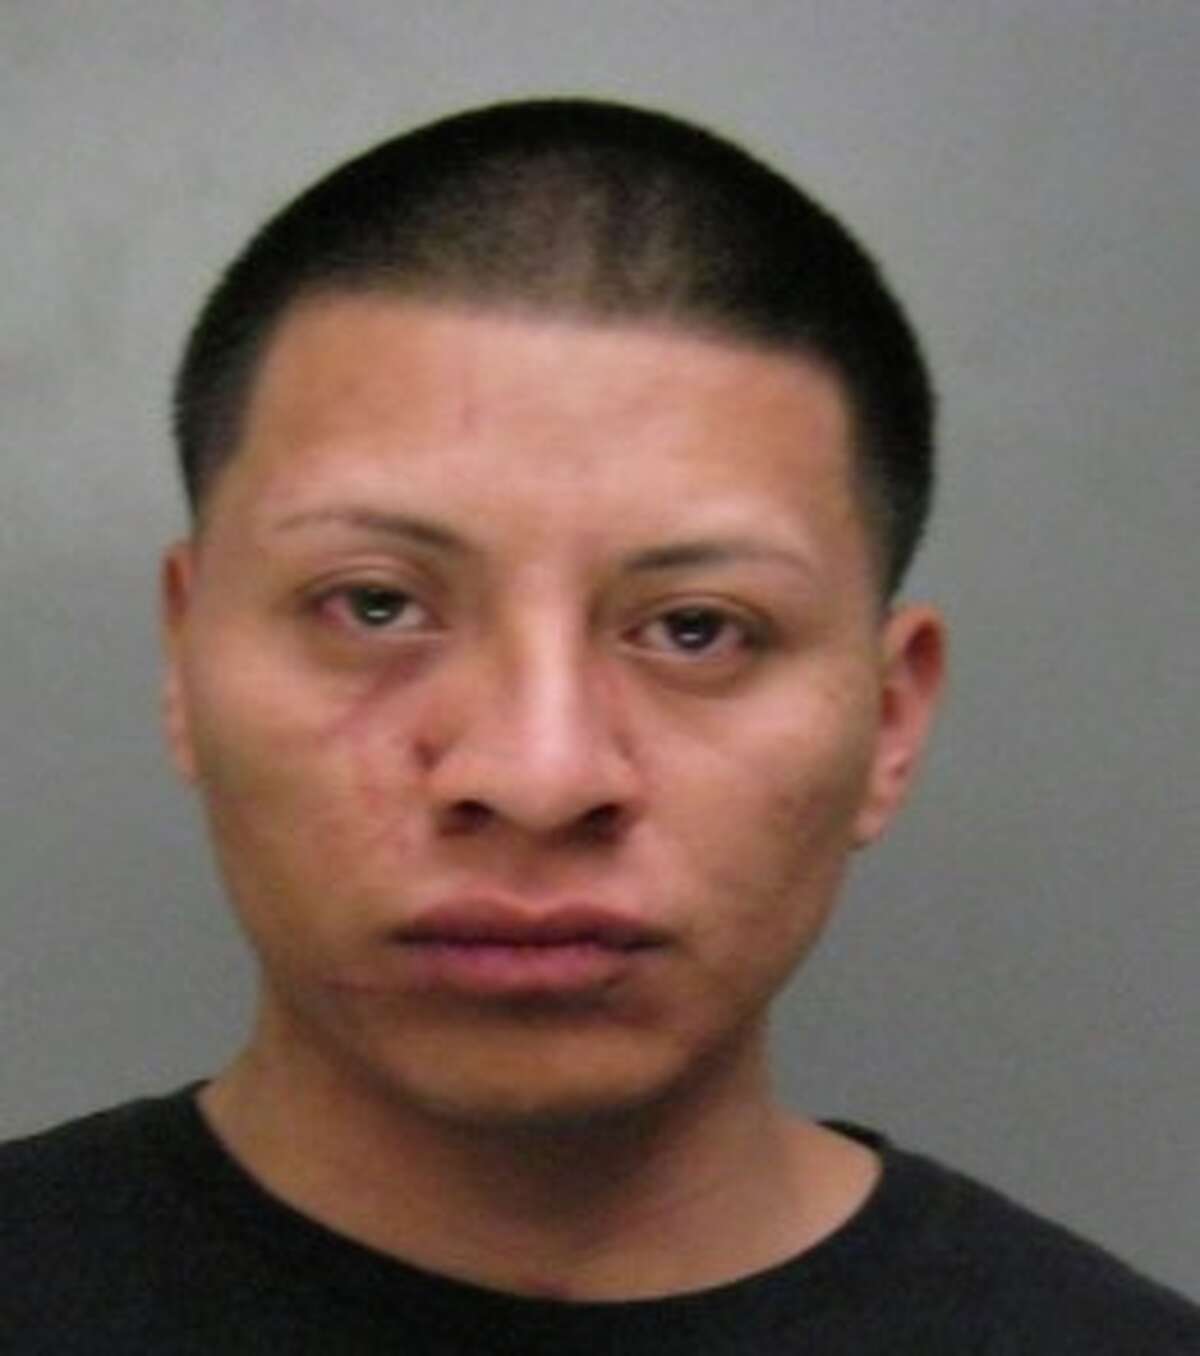 Bridgeport Francisco Trinidad DOB: 5/14/90 Wanted for: Negligent homicide with motor vehicle